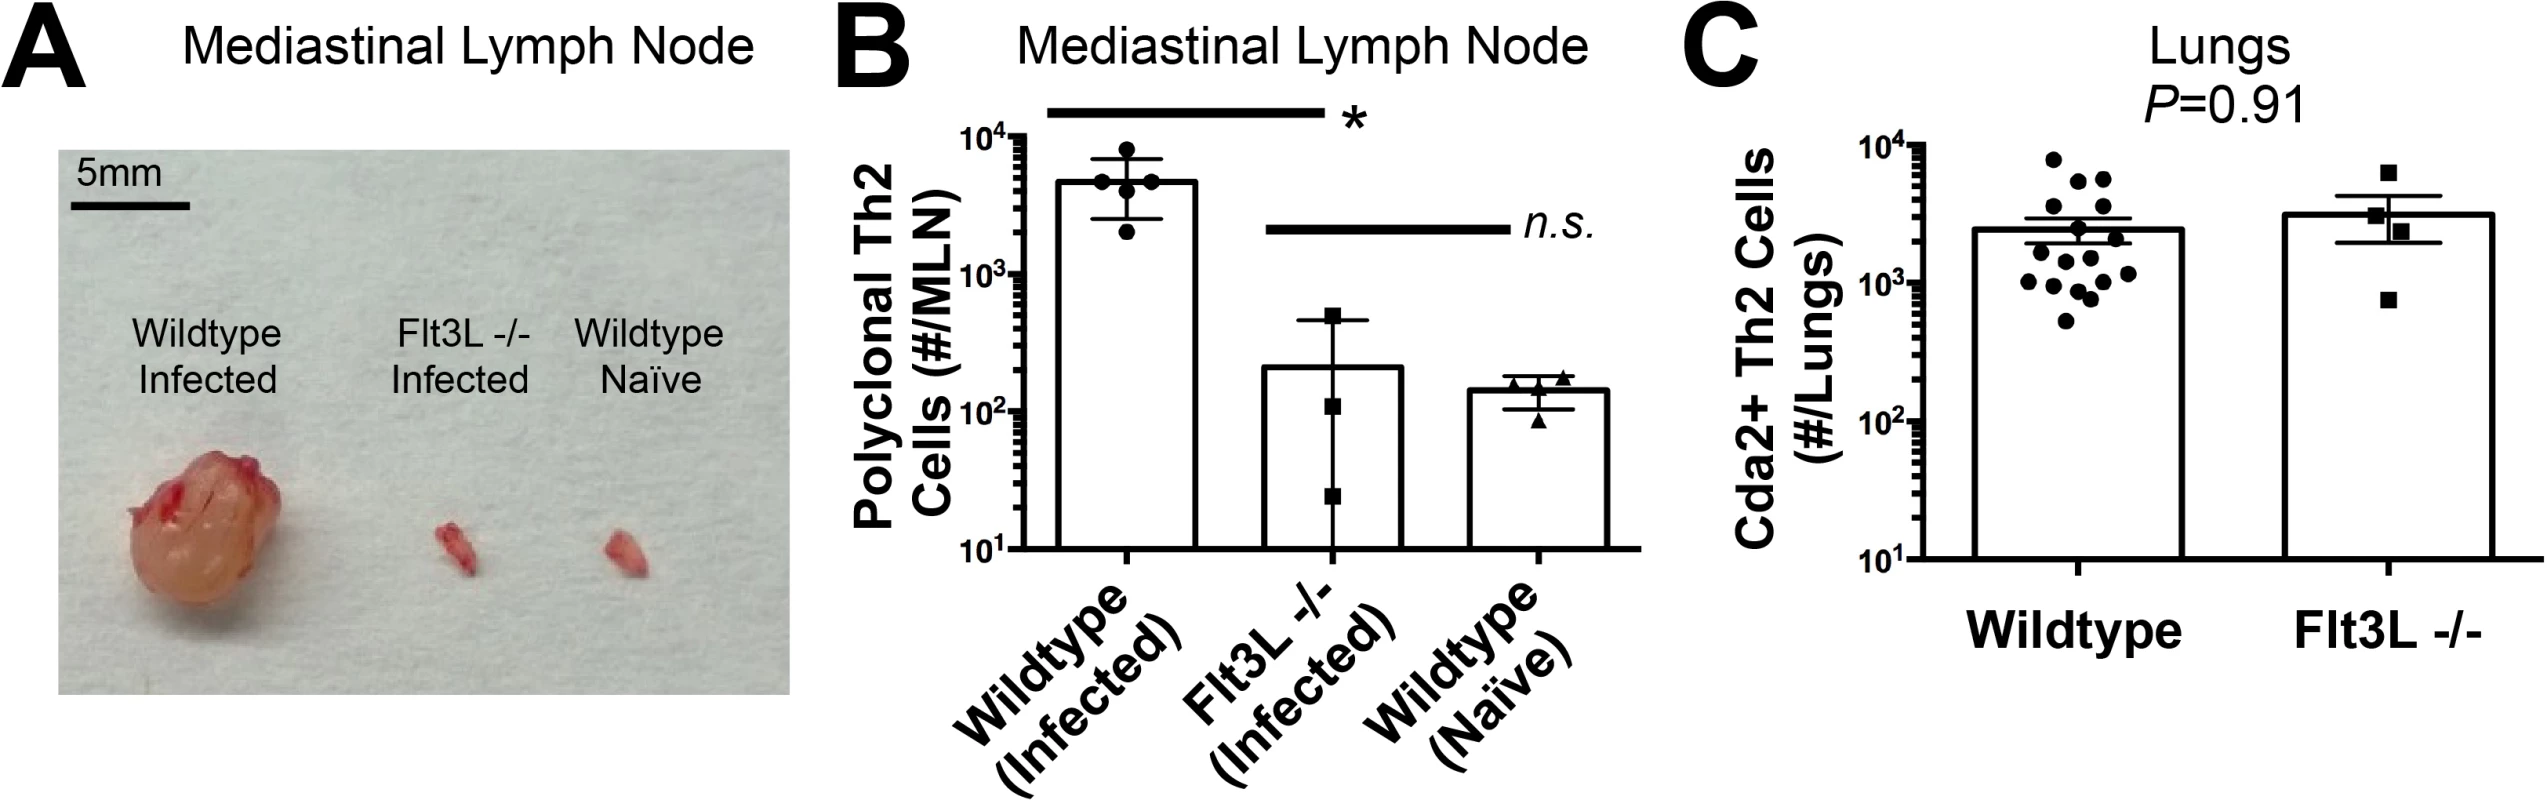 Lymphoid Priming is Dispensible for Pulmonary Th2 Cell Induction during Cryptococcal Infection.